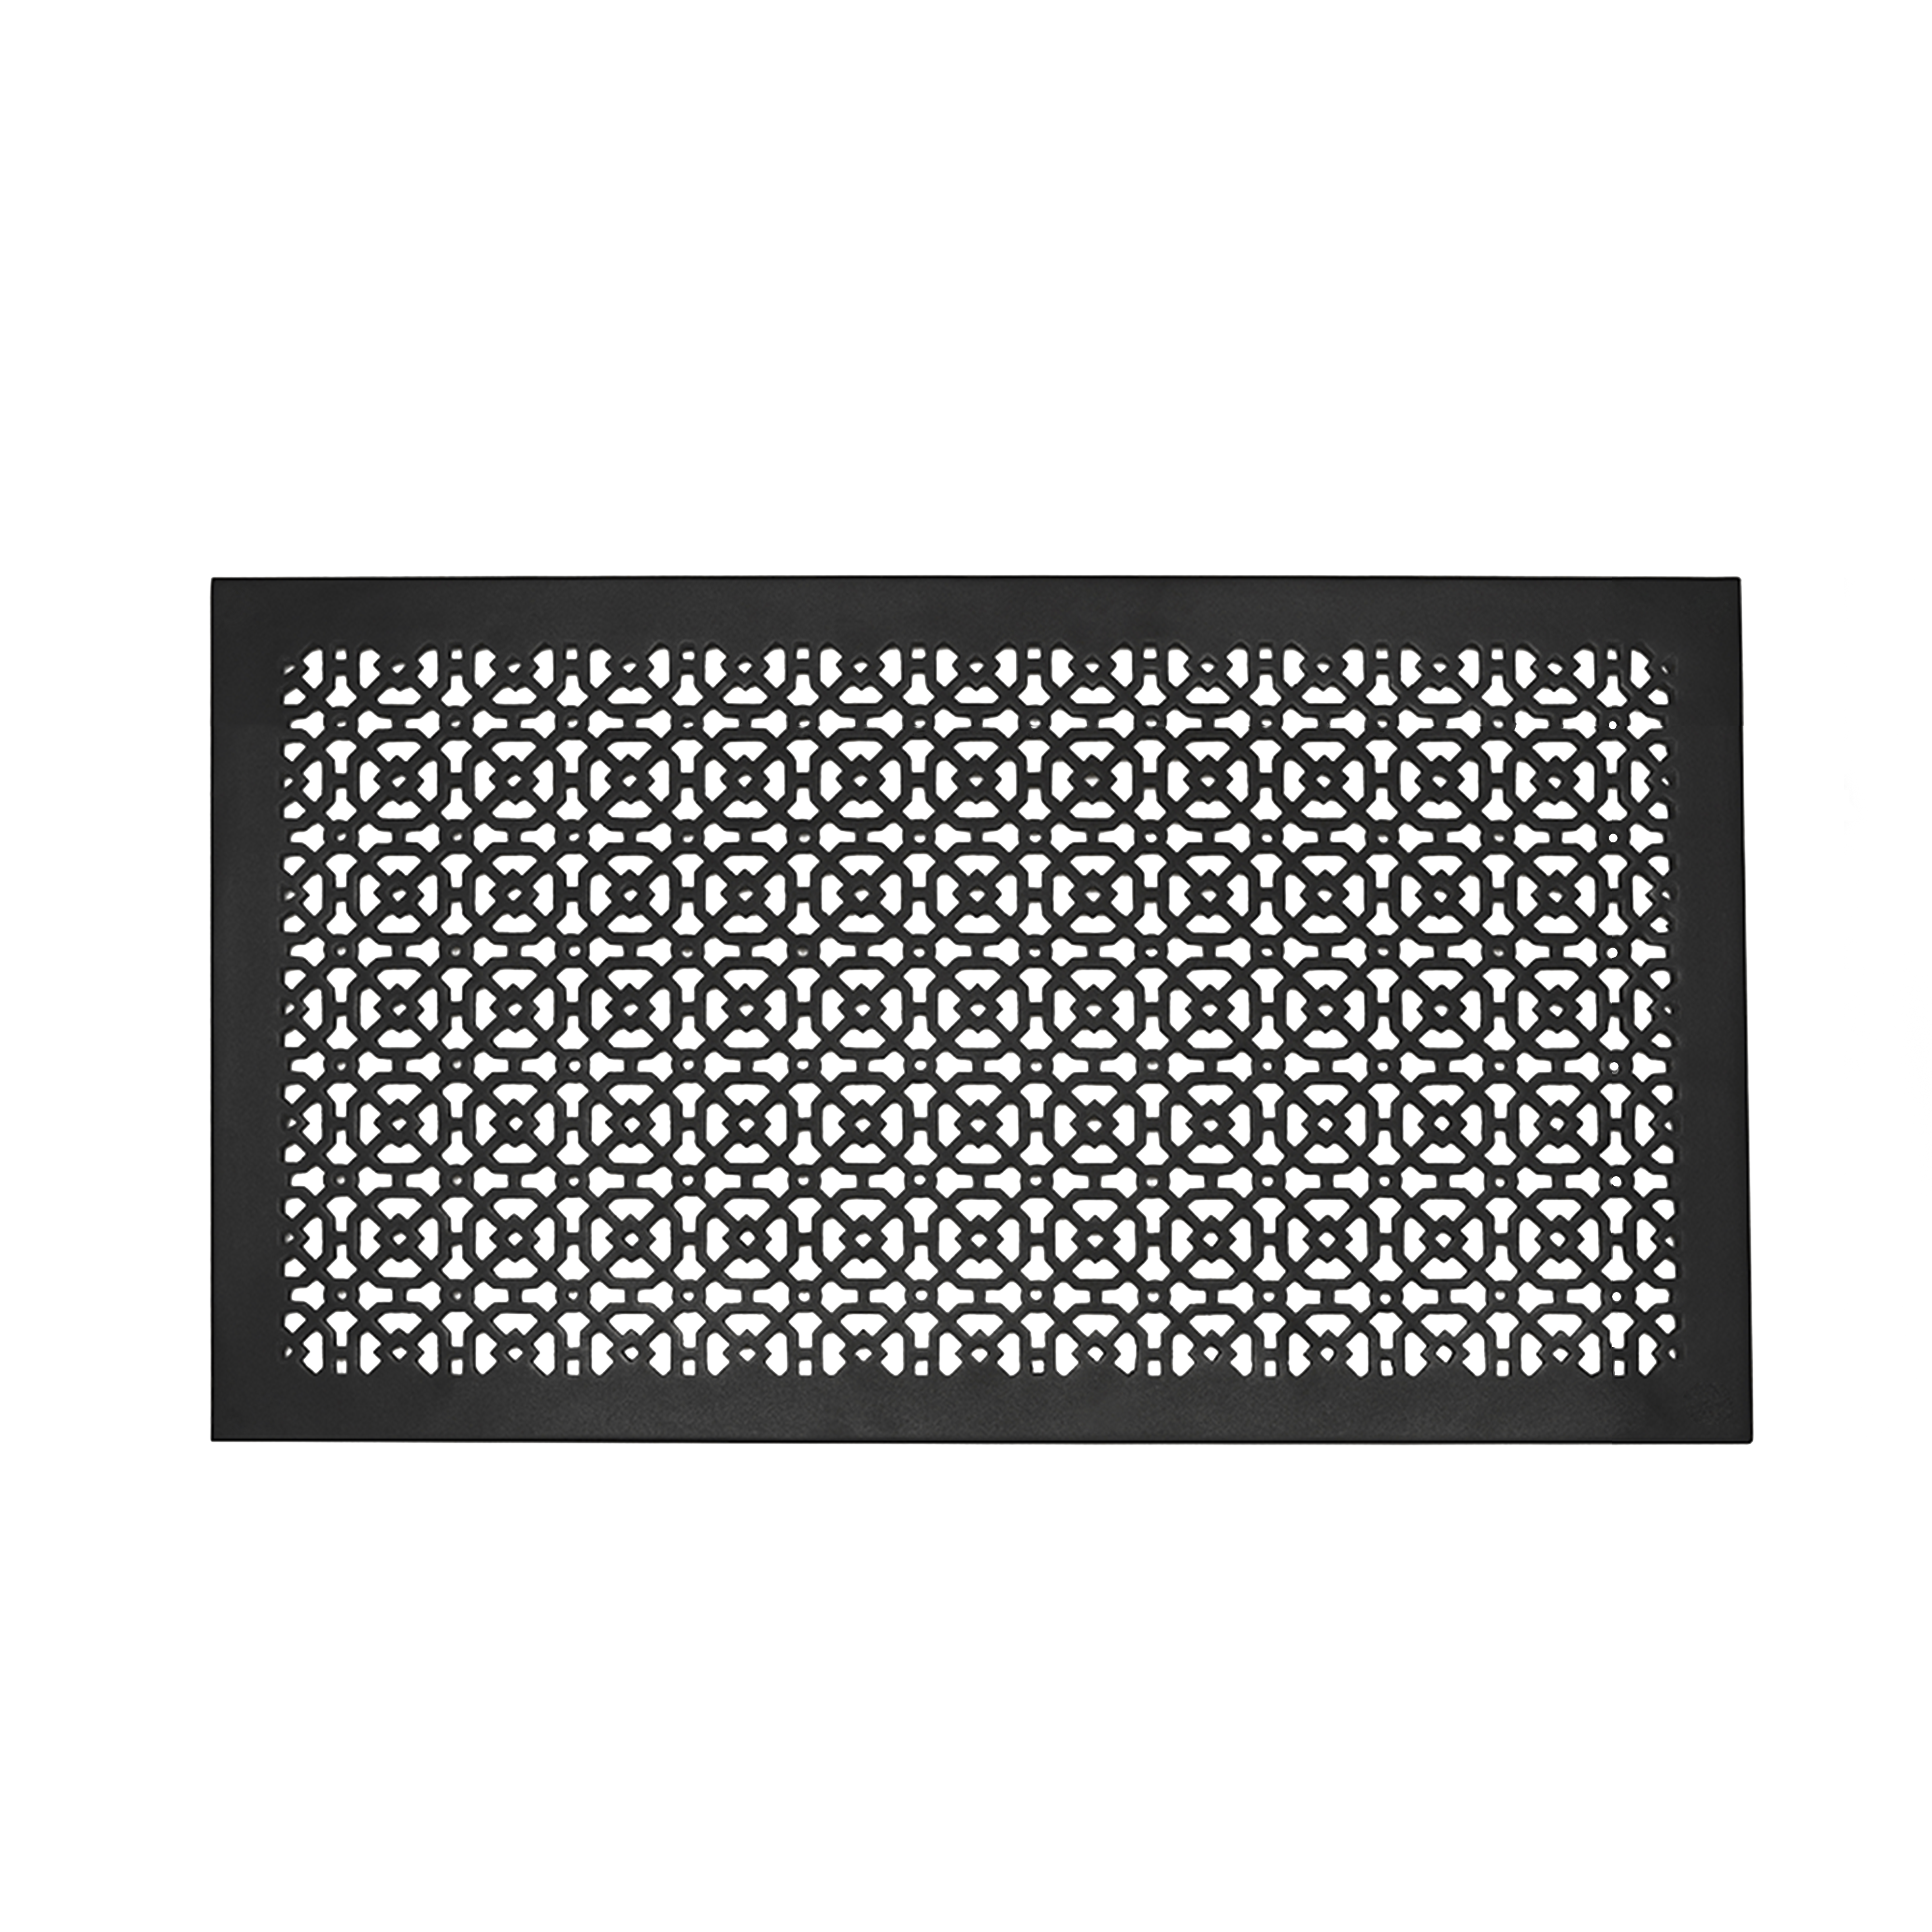 Achtek AIR RETURN 14"x26" Duct Opening (Overall Size 16"x28") | Heavy Cast Aluminum Air Grille HVAC Duct || Powder Coated